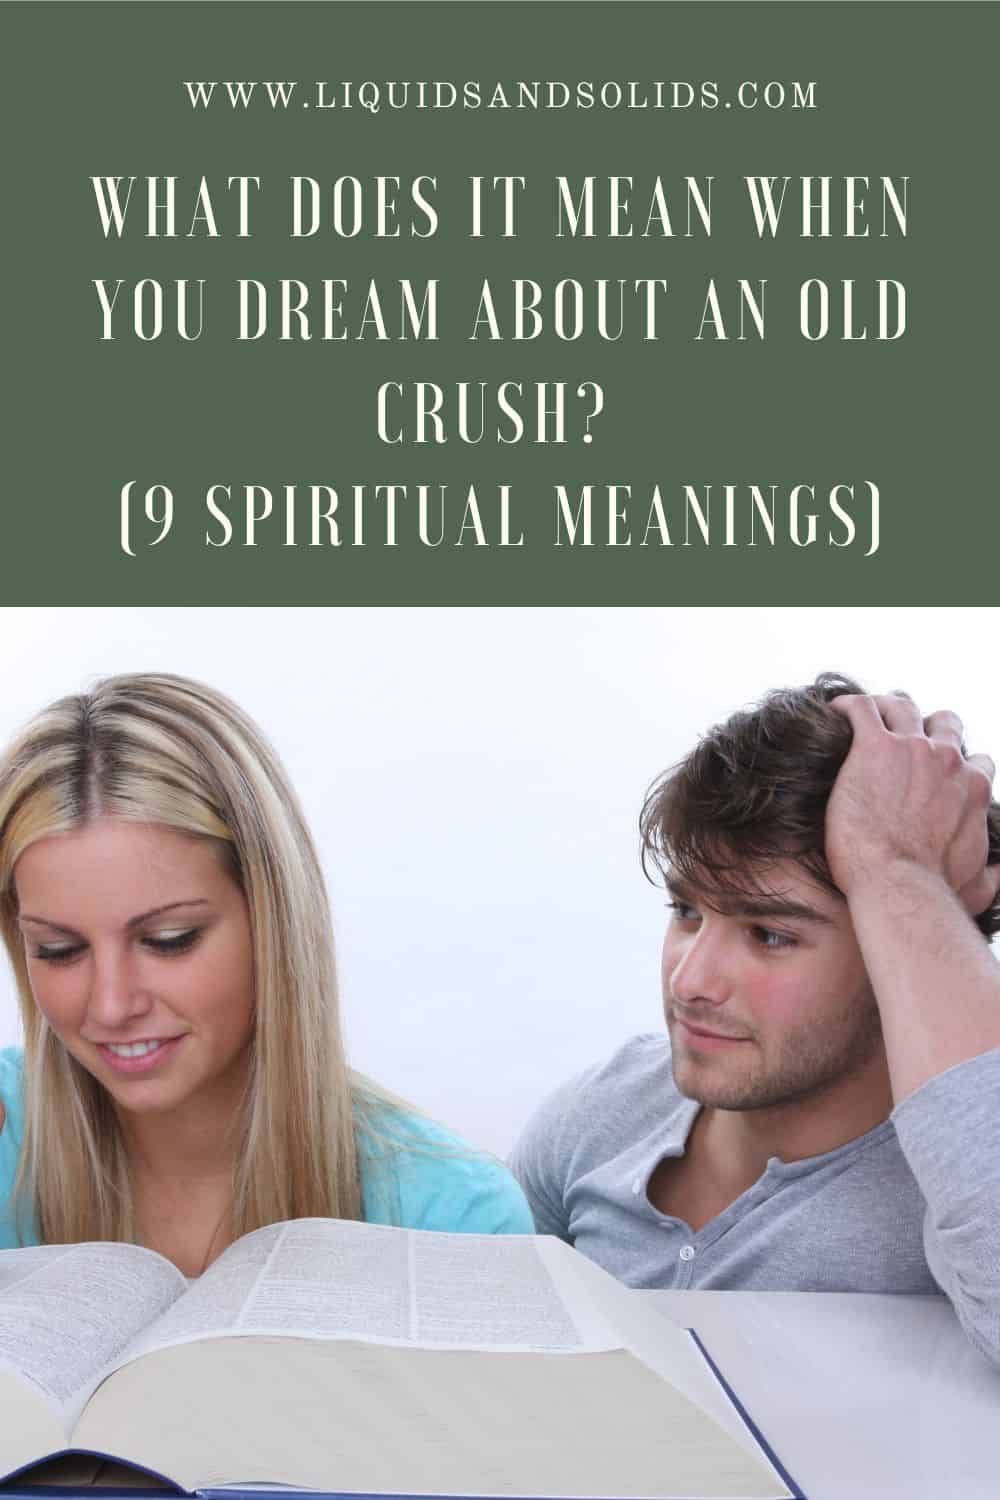 9 Meanings to Dreaming about an Old Crush